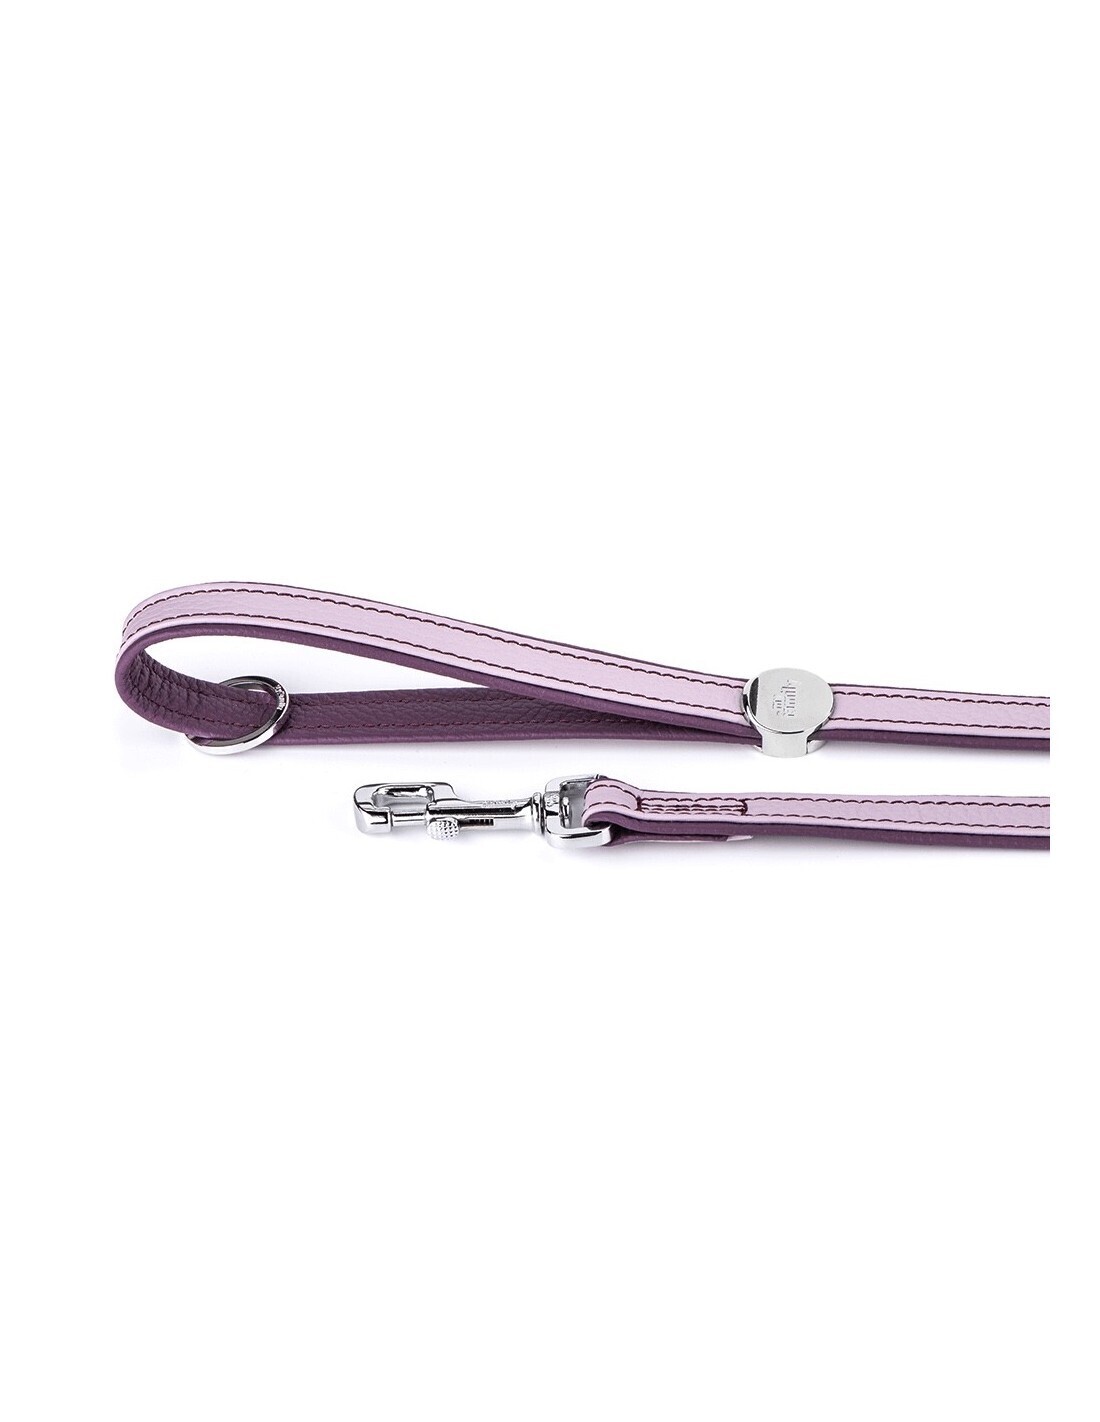 MyFamily Firenze Dog Leash in Genuine Italian Pink Leather